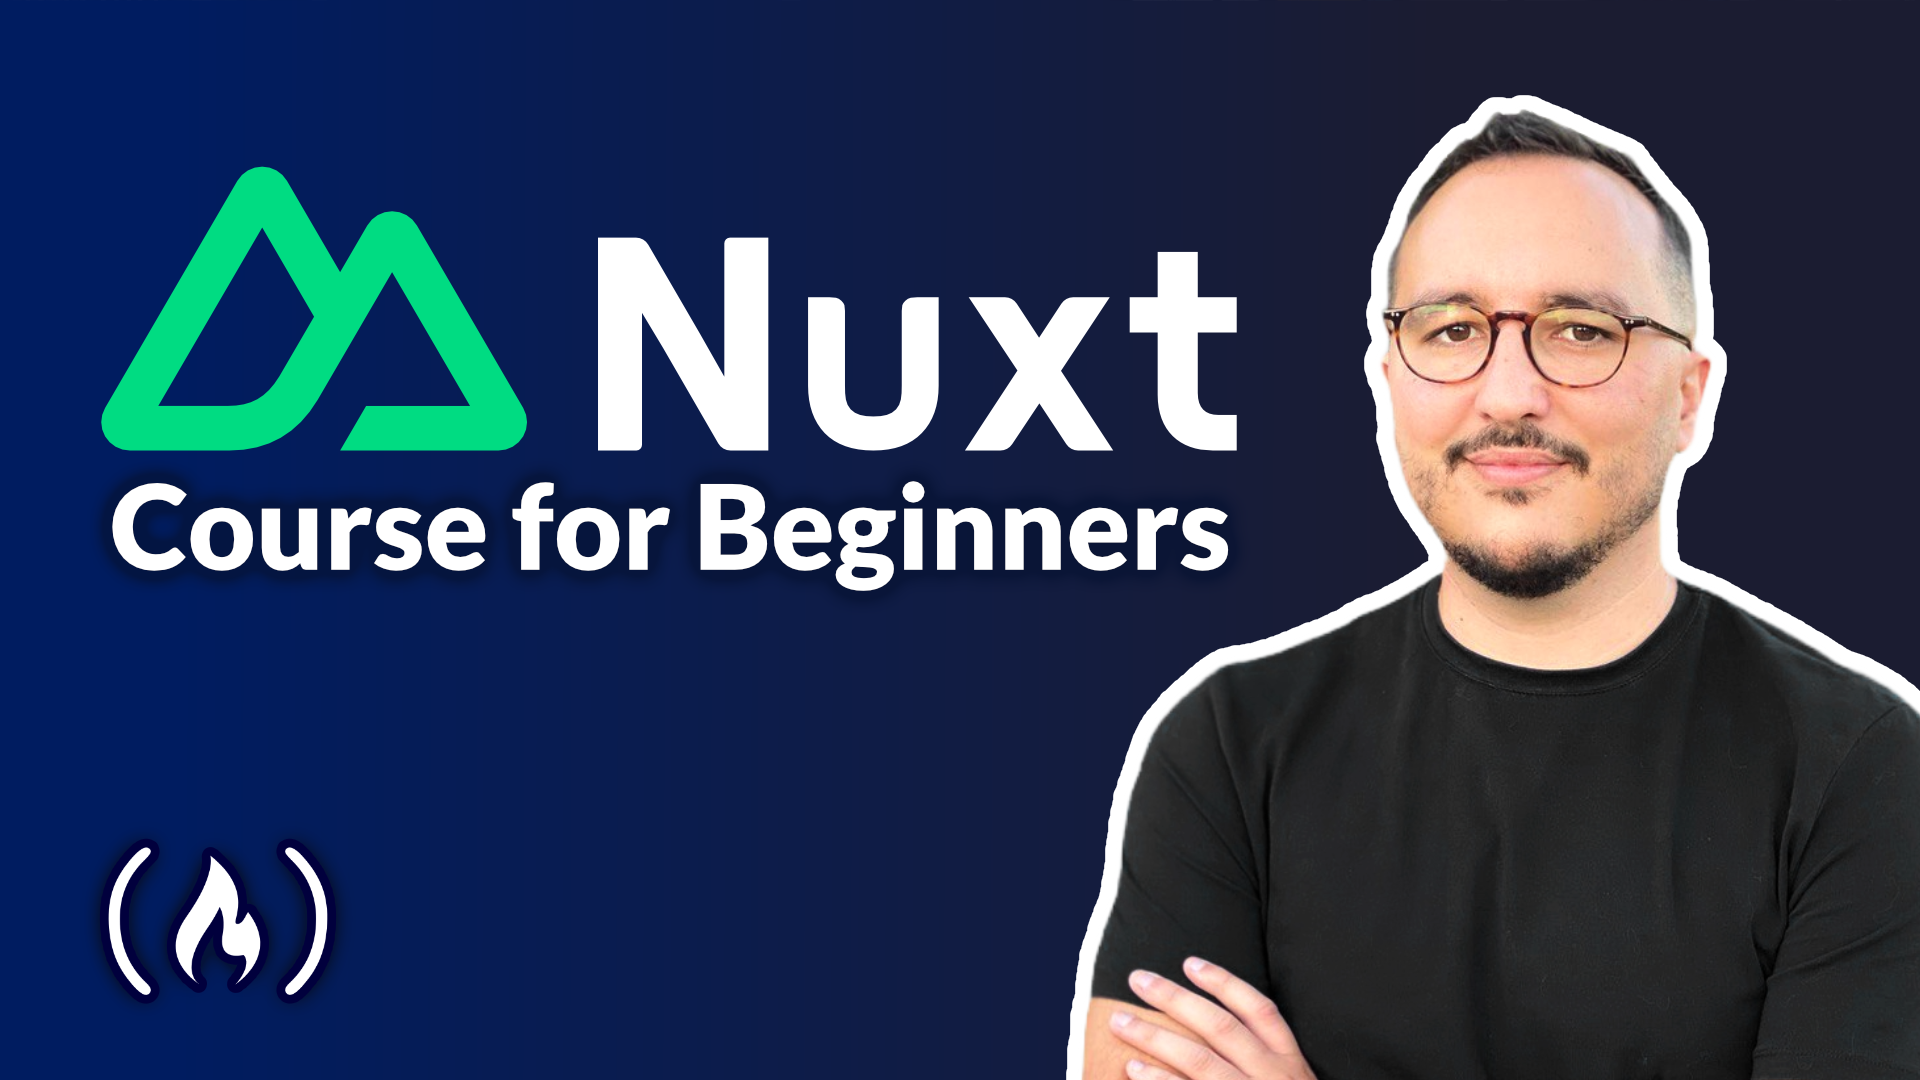 Nuxt 3 Course for Beginners